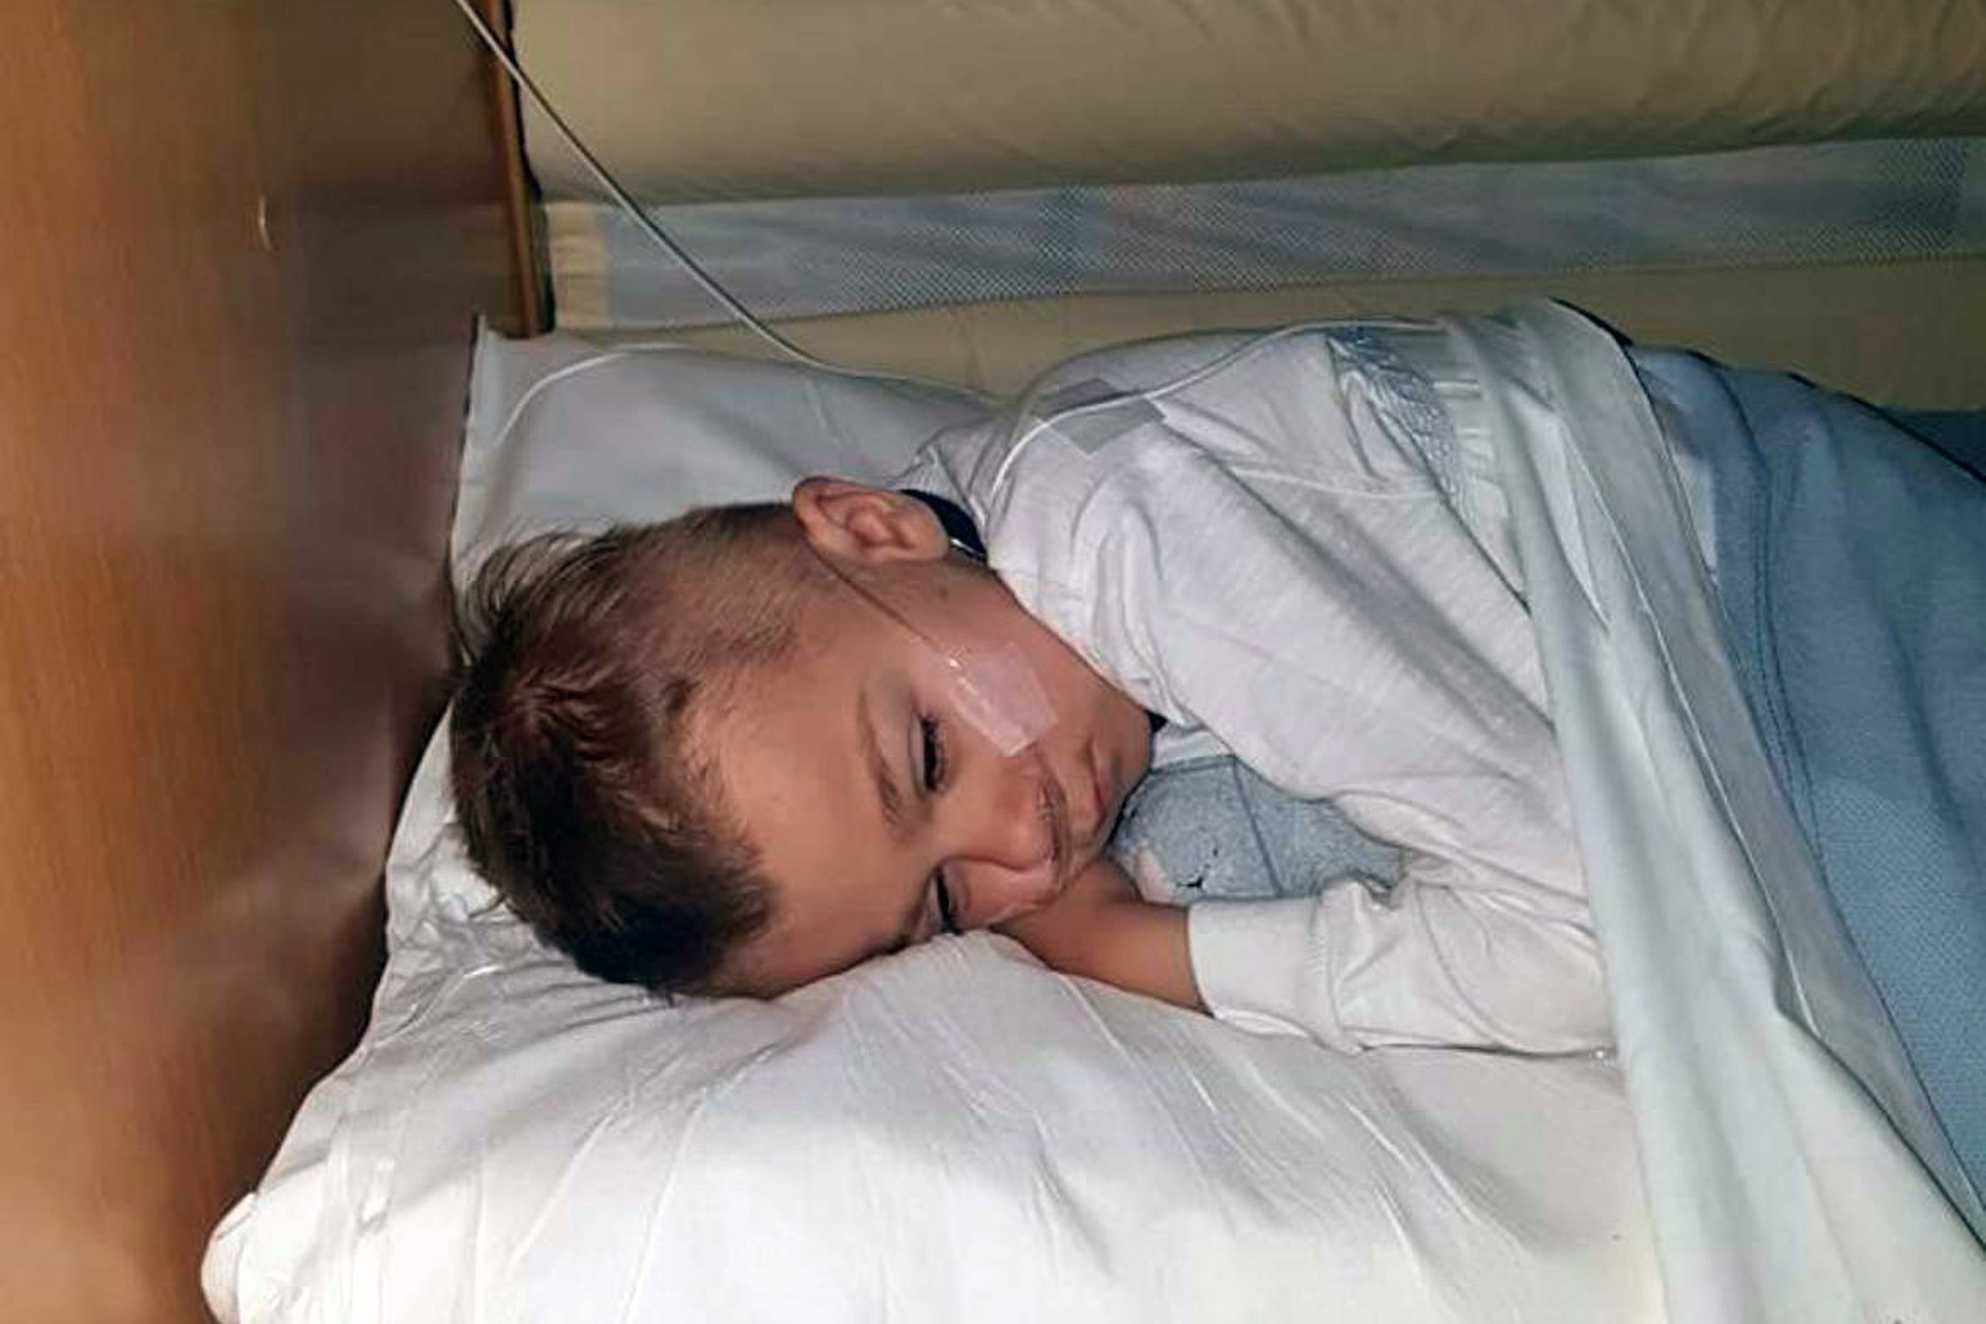 Jack asleep in a hospital bed with a feeding tube in his nose during treatment for his condition.